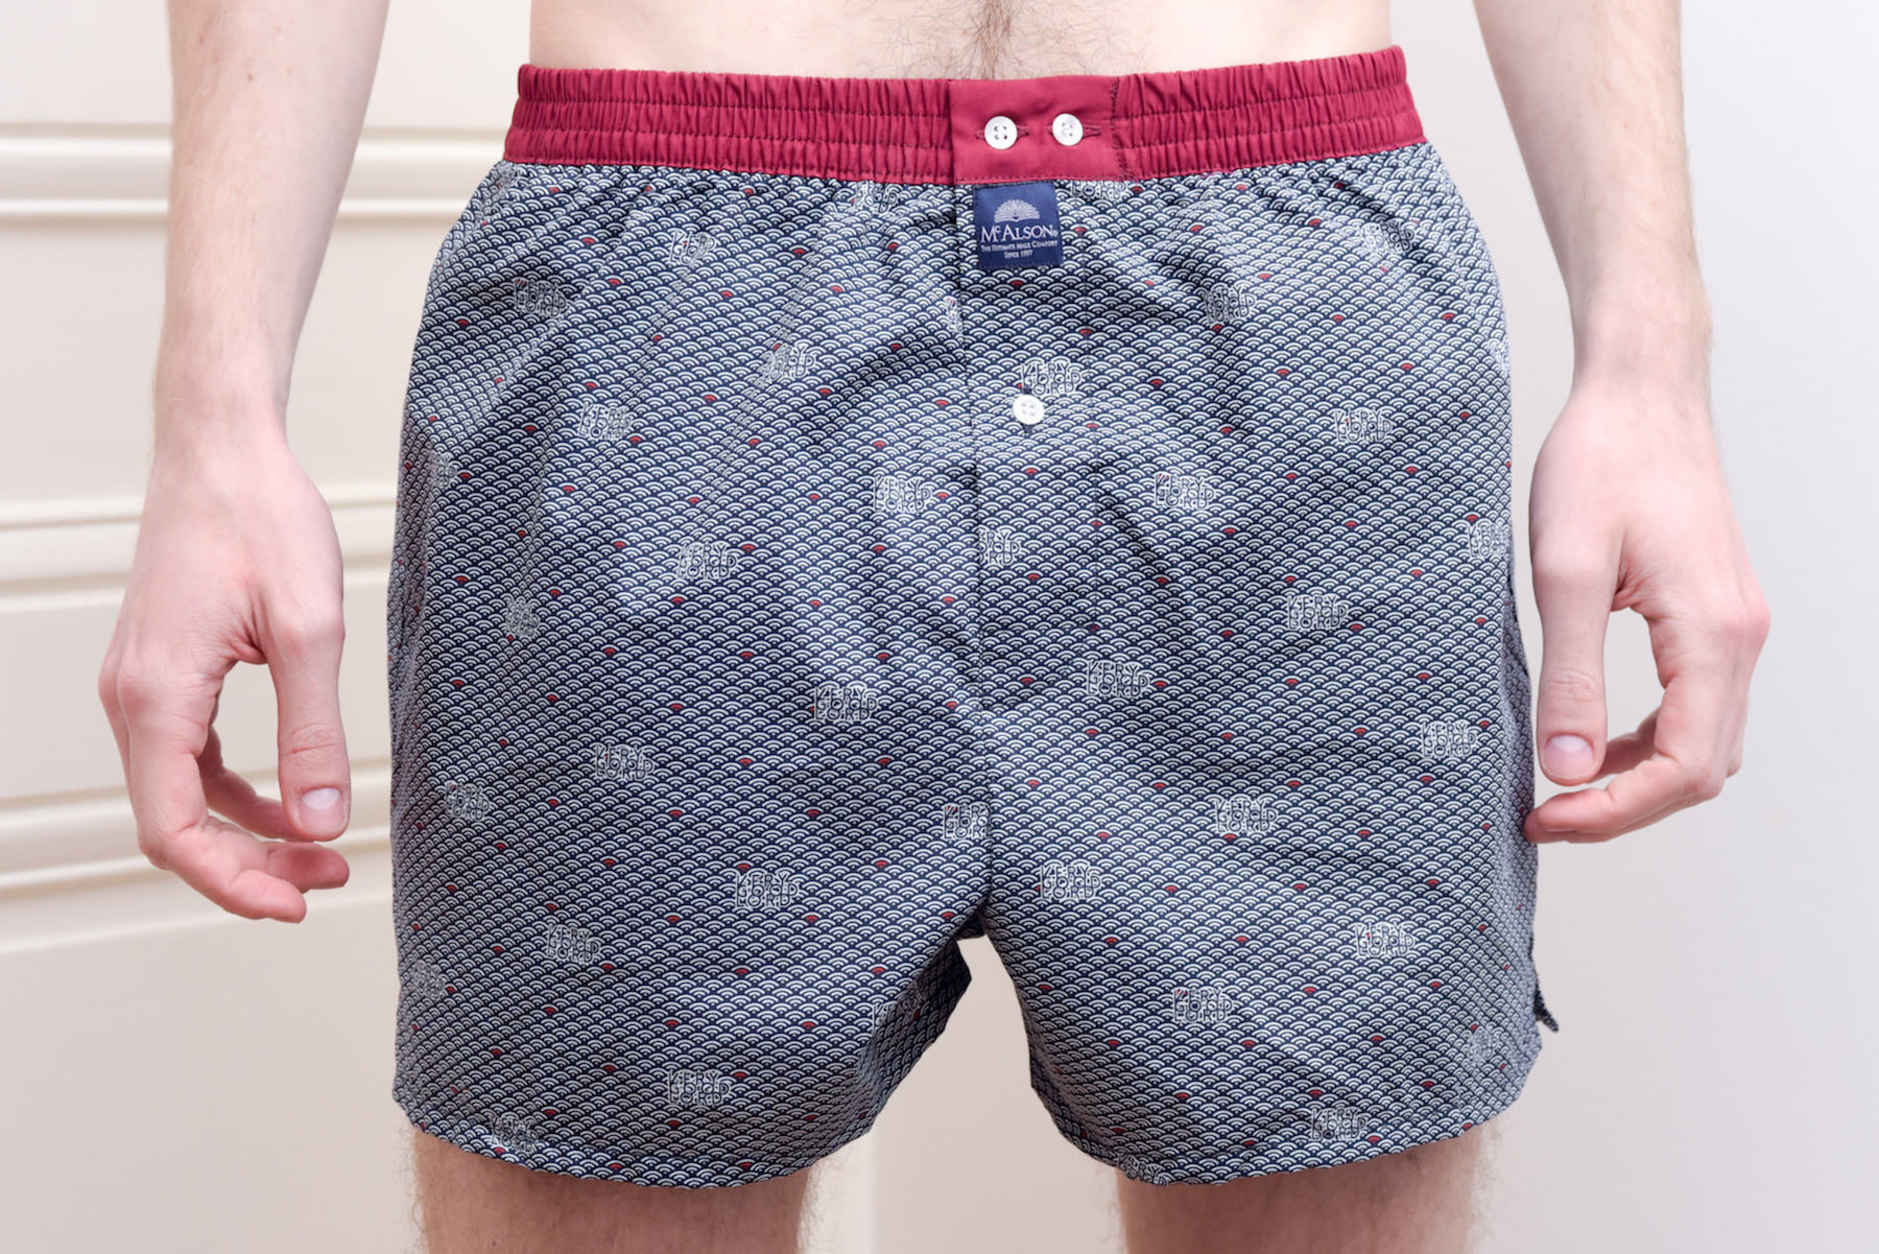 The Verygoodlord boxer short